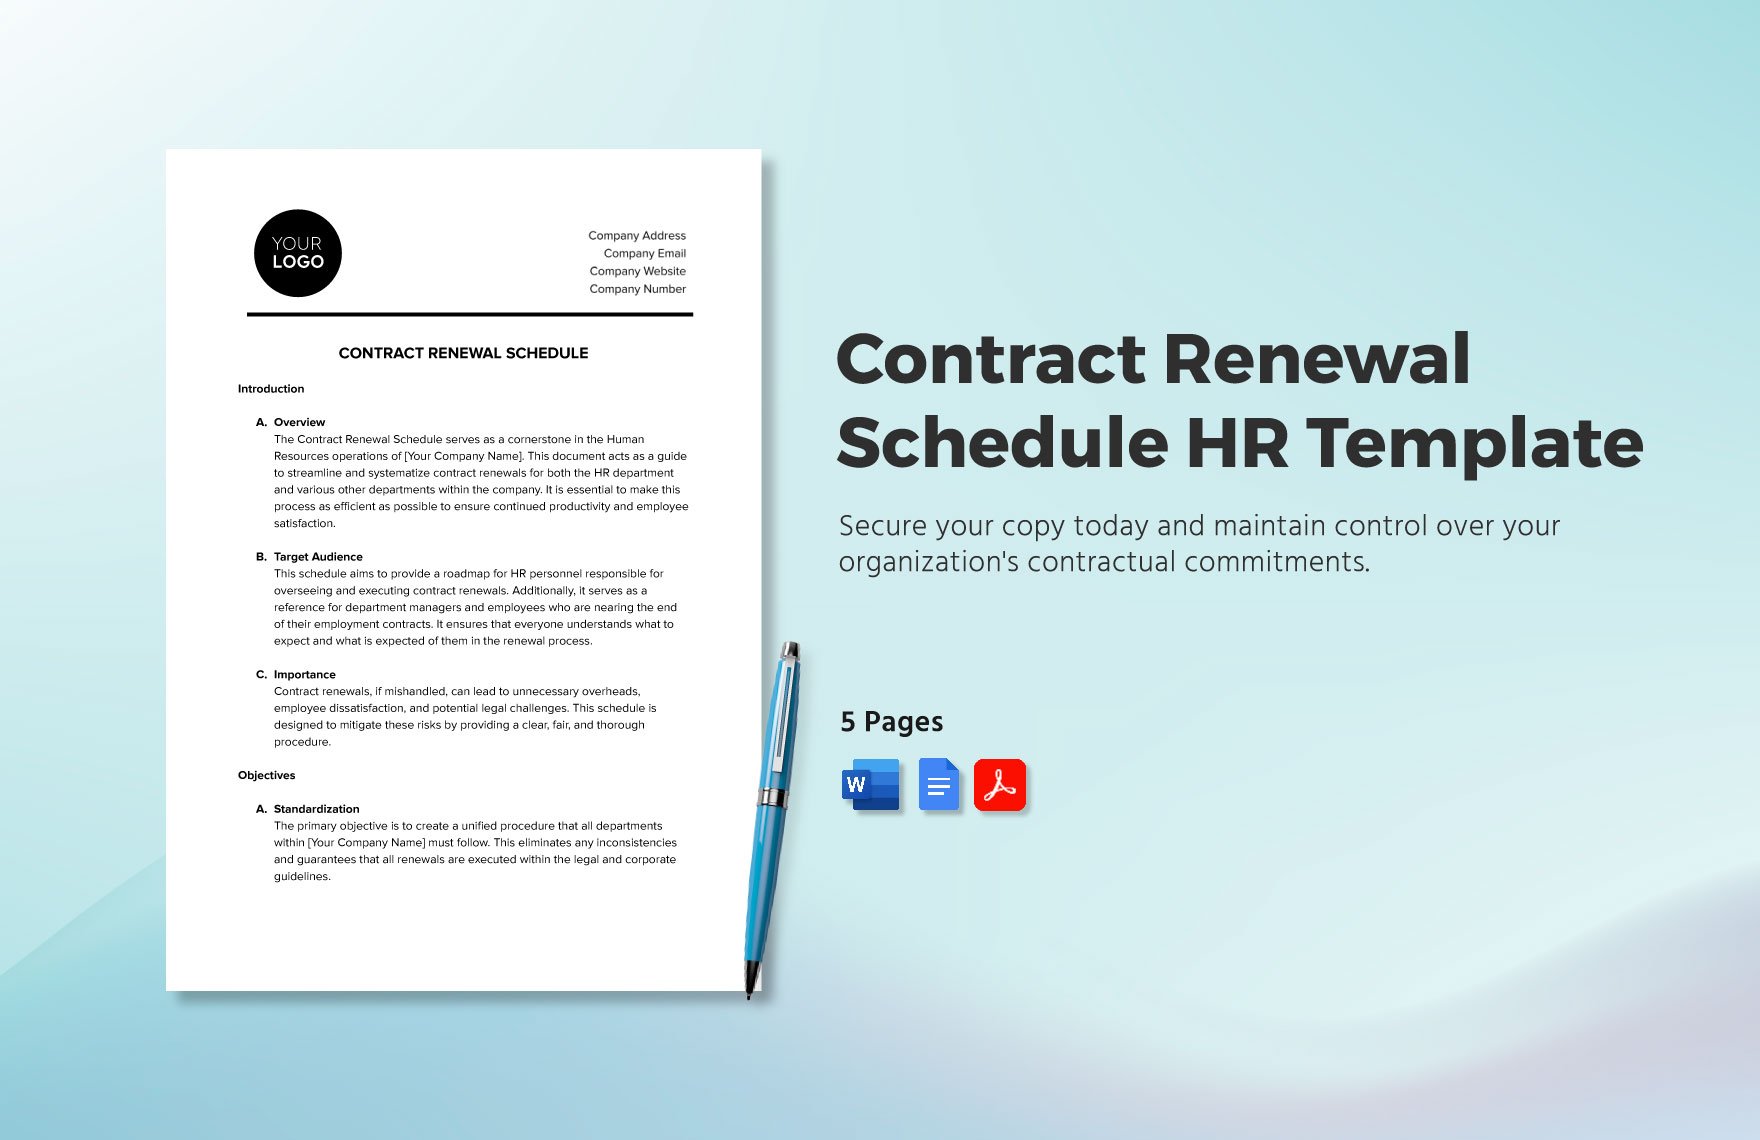 Contract Renewal Schedule HR Template in Word, Google Docs, PDF